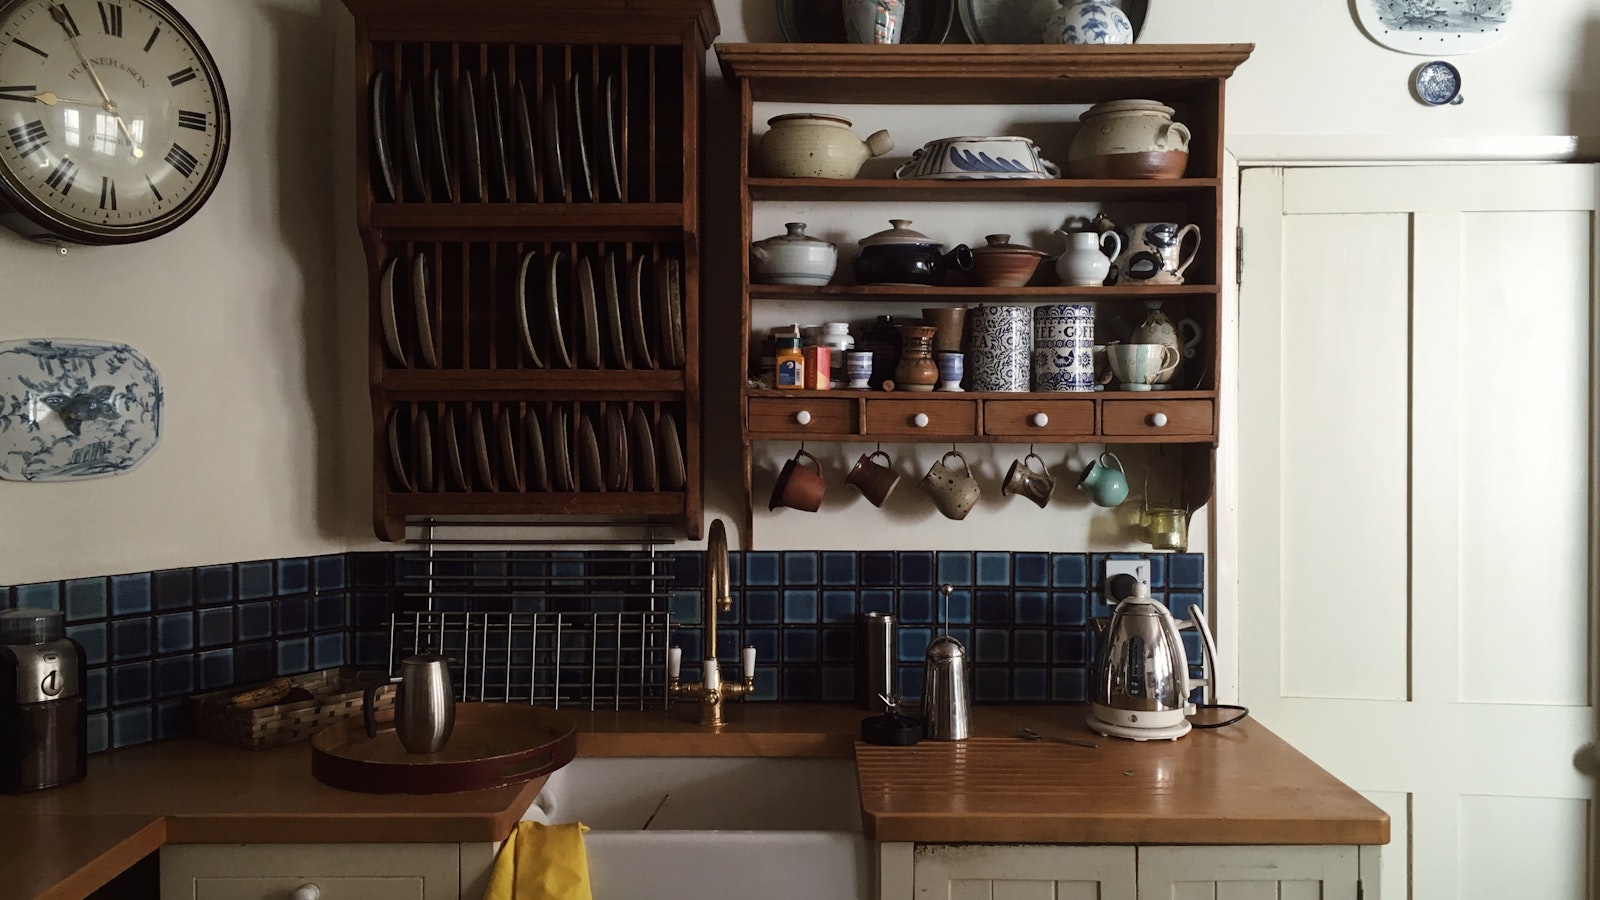 Dreamy Country Kitchens On Instagram